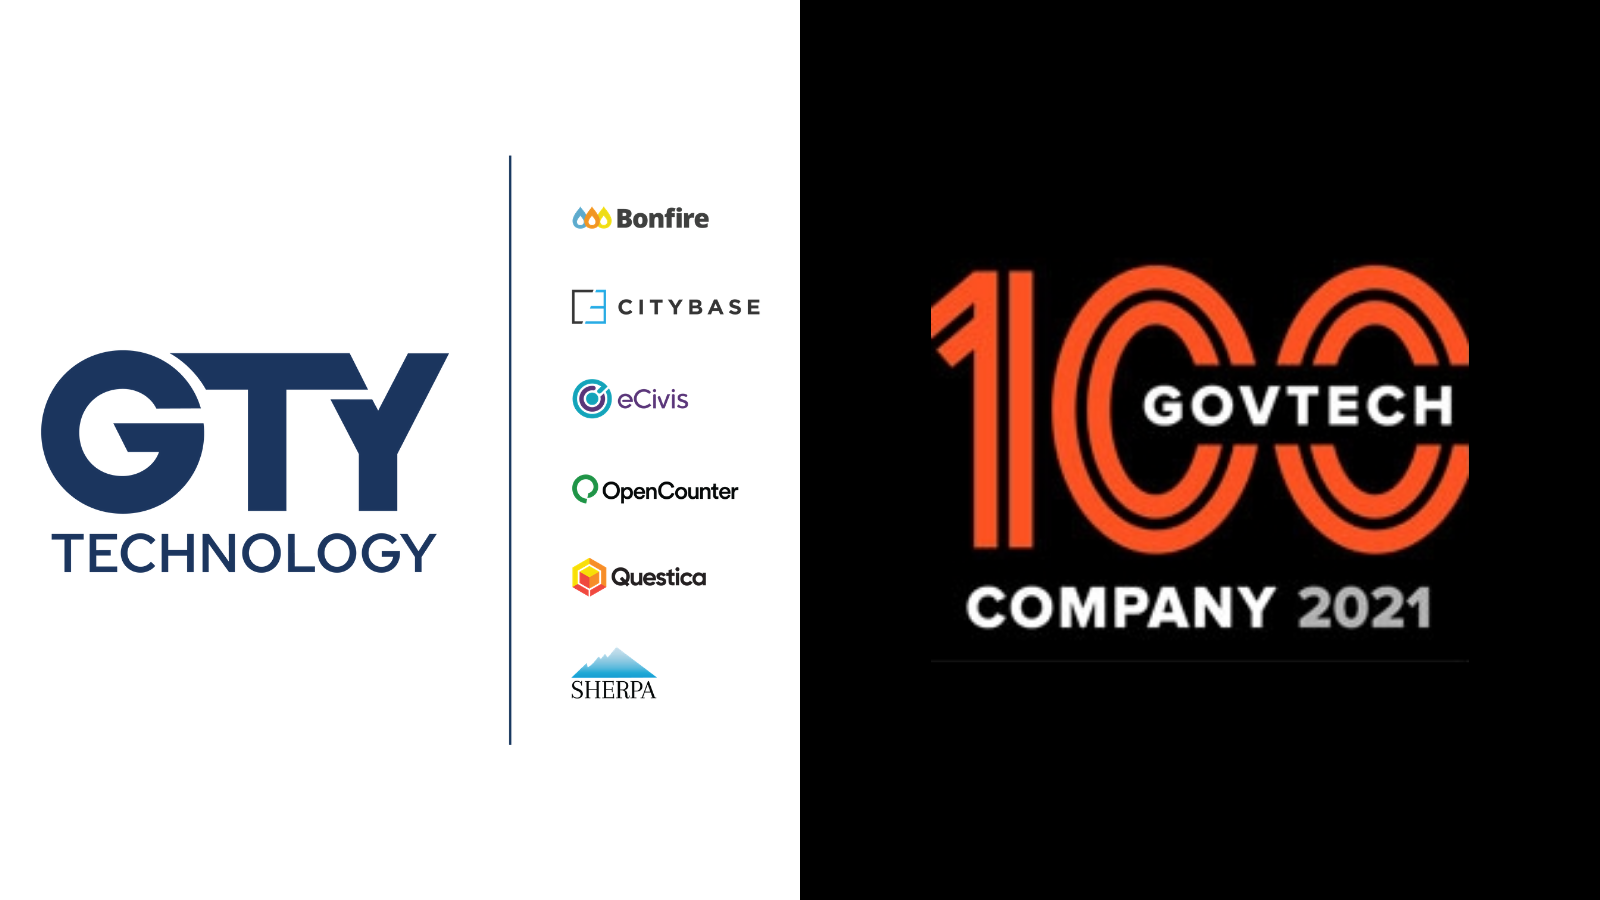 GTY Technology recognized as GovTech 100 Company for 2021